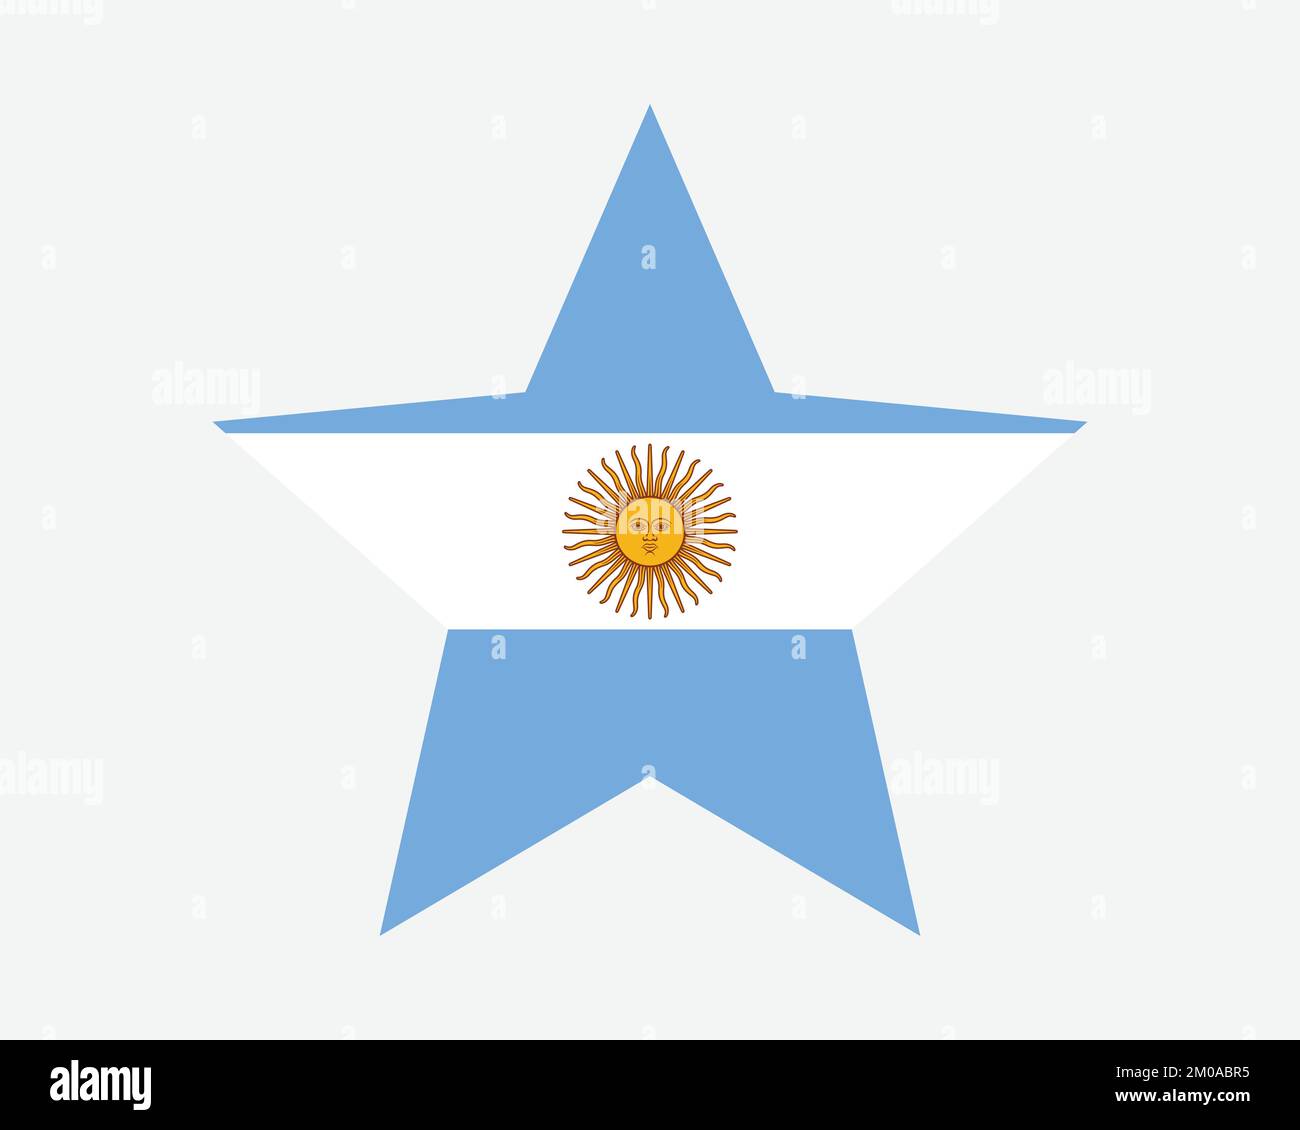 Argentina Star Flag. Argentine Star Shape Flag. Argentinean Argentinian Country National Banner Icon Symbol Vector 2D Flat Artwork Graphic Illustratio Stock Vector